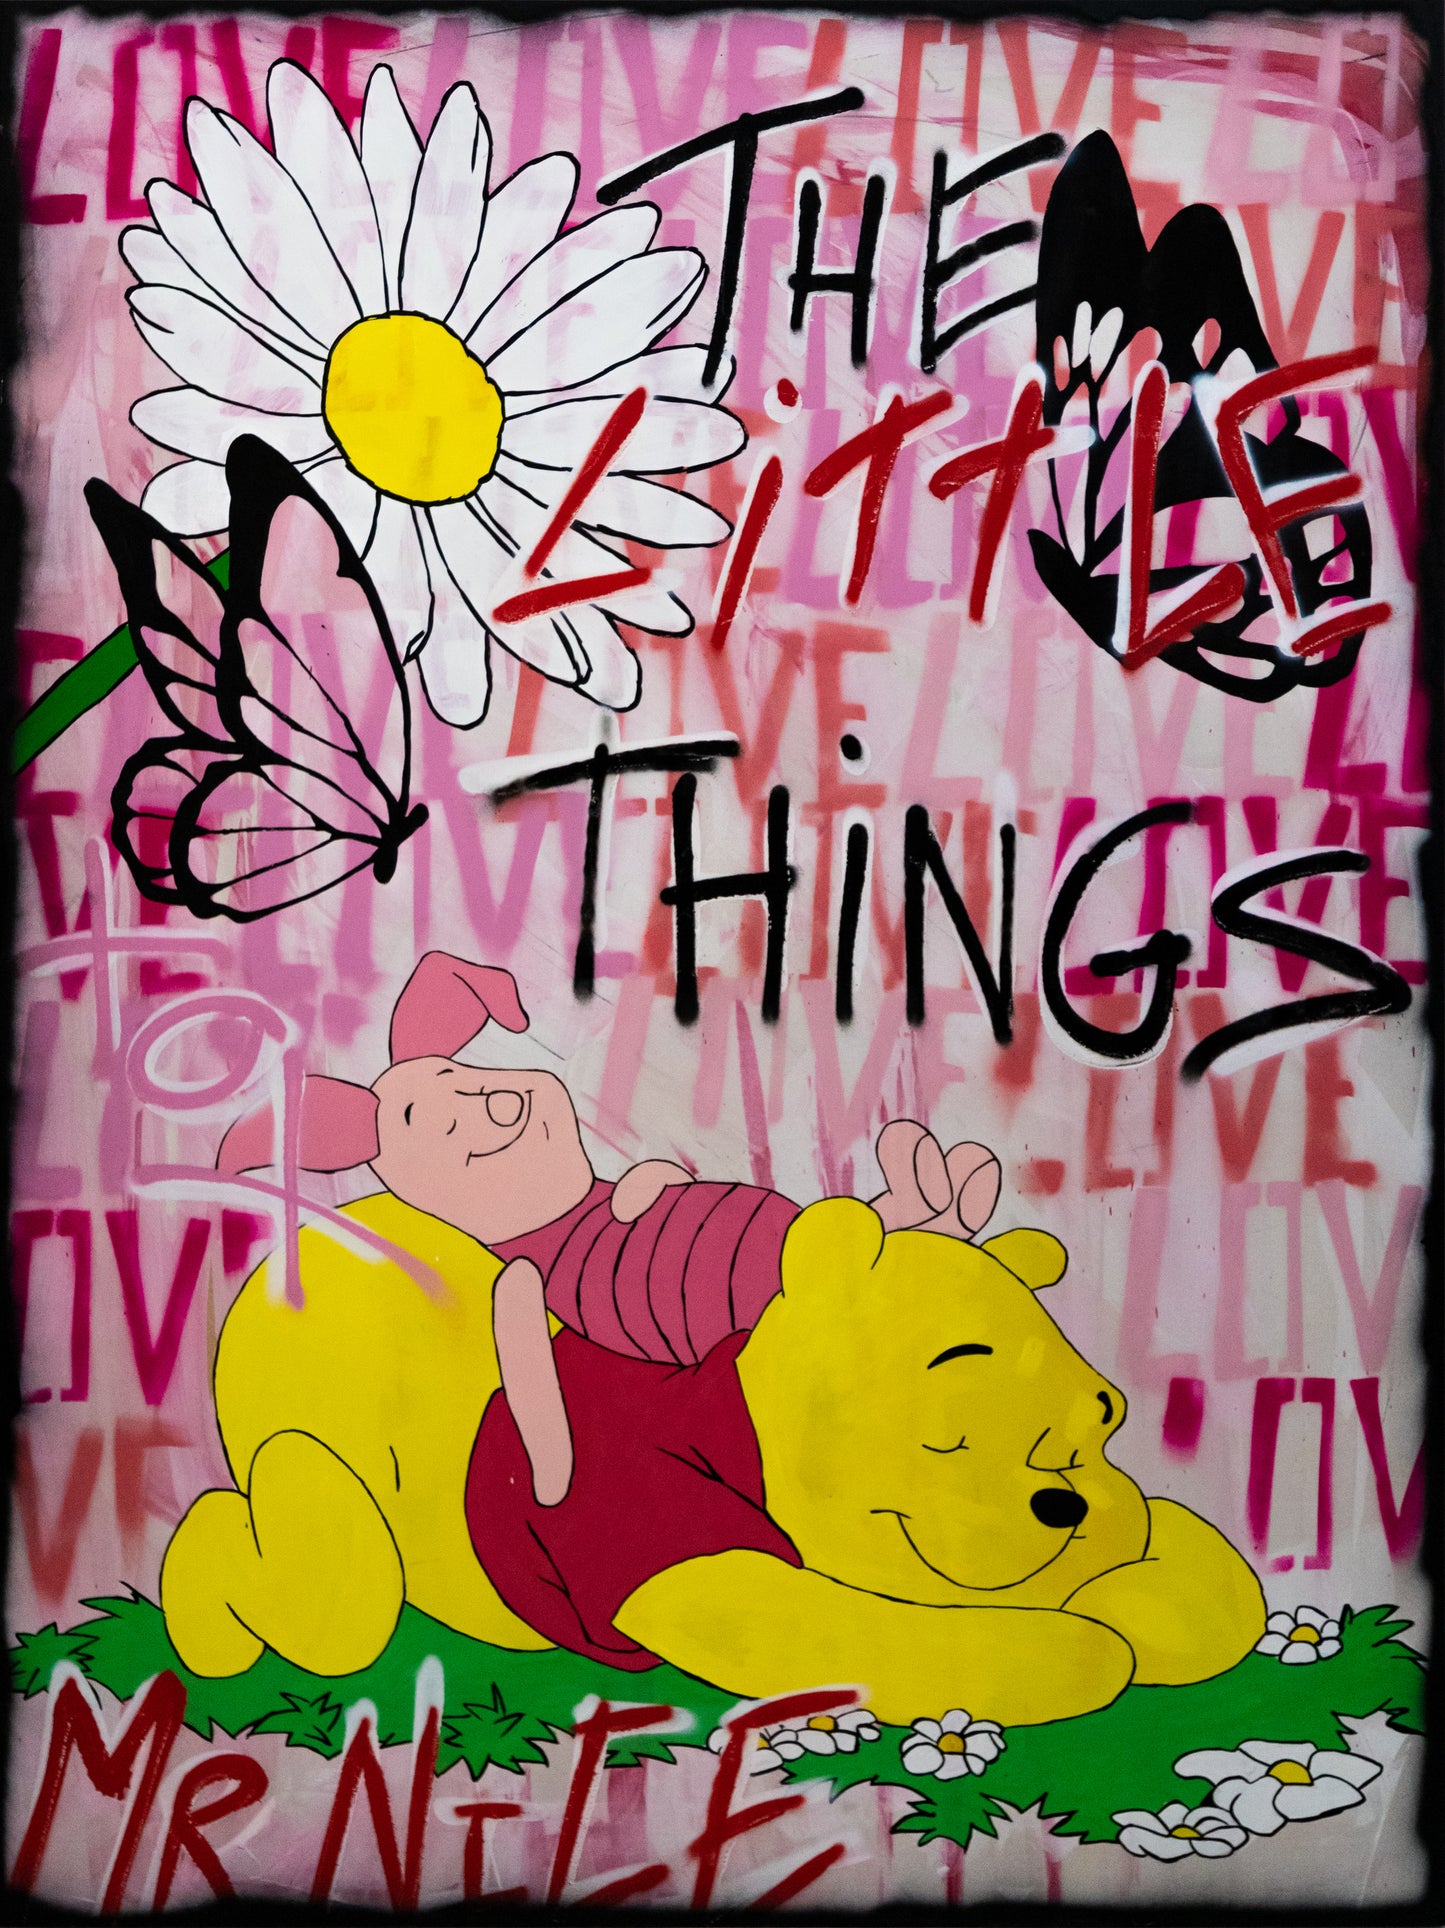 THE LITTLE THINGS $3900 - ARTBYMRNICE